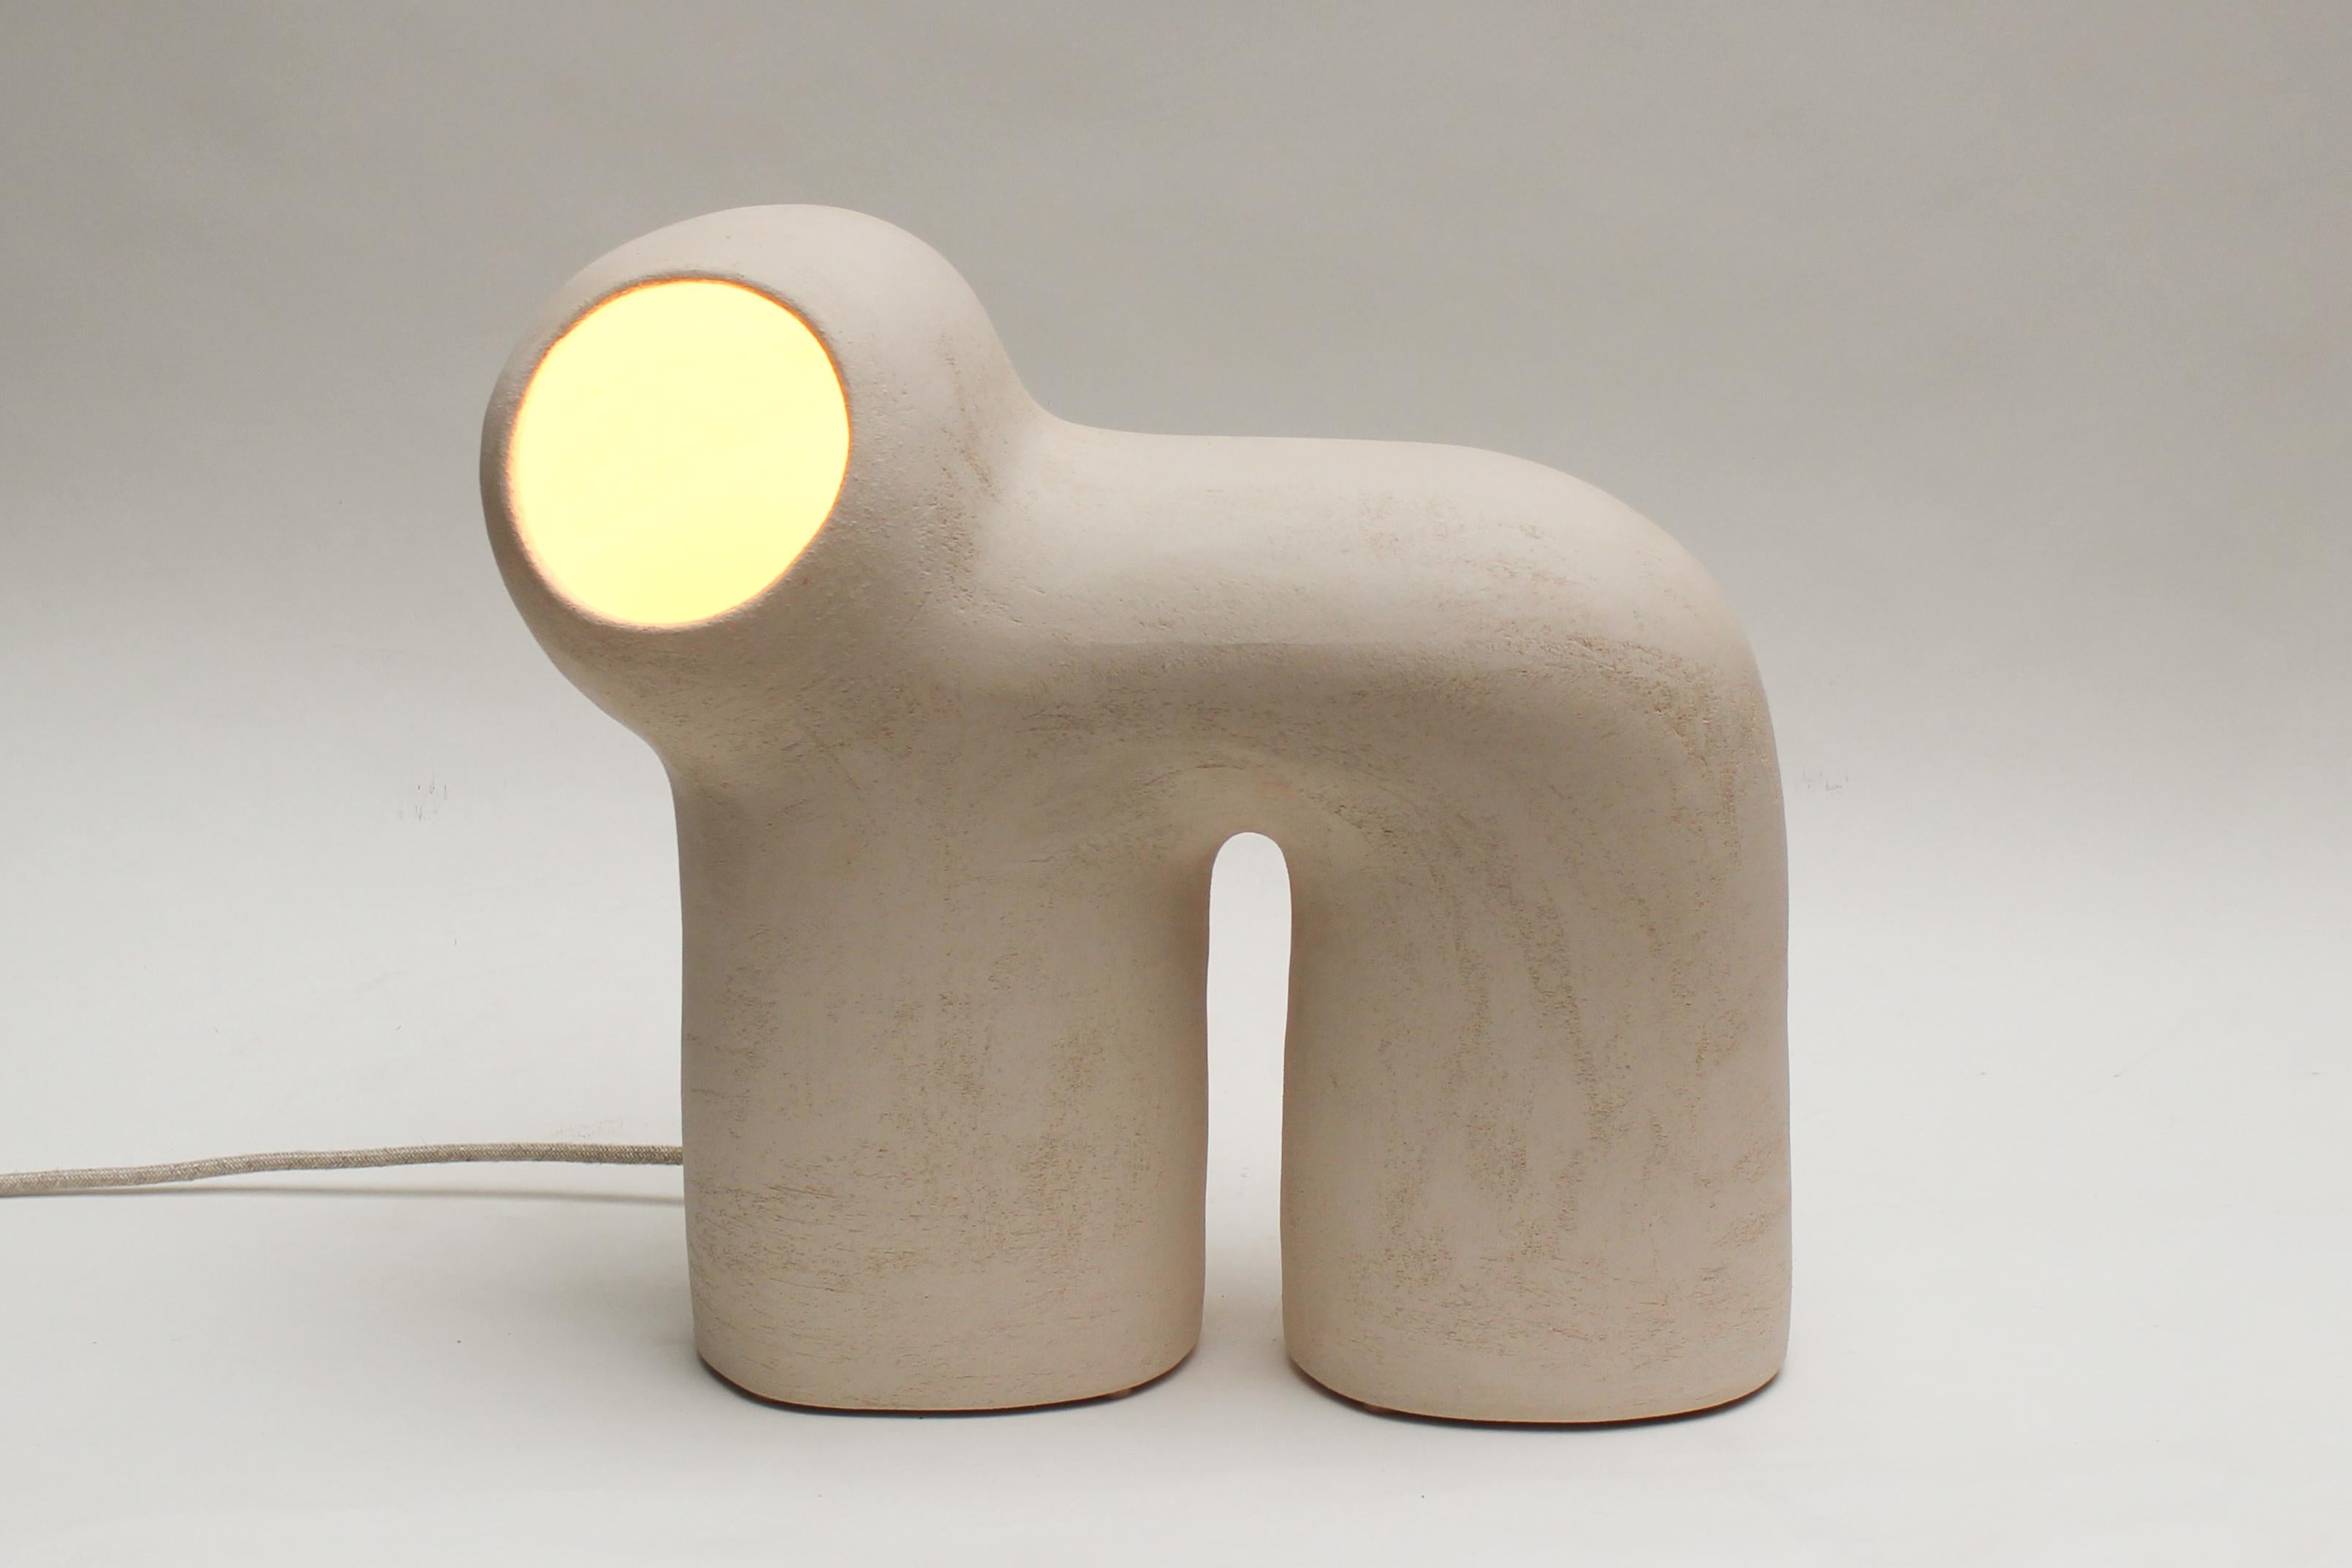 Cocon #5 White stoneware lamp by Elisa Uberti
Dimensions: High around 35/40 cm
Materials: White stoneware

After fifteen years in fashion, Elisa Uberti decides to take the time to work with these hands and to give birth to new